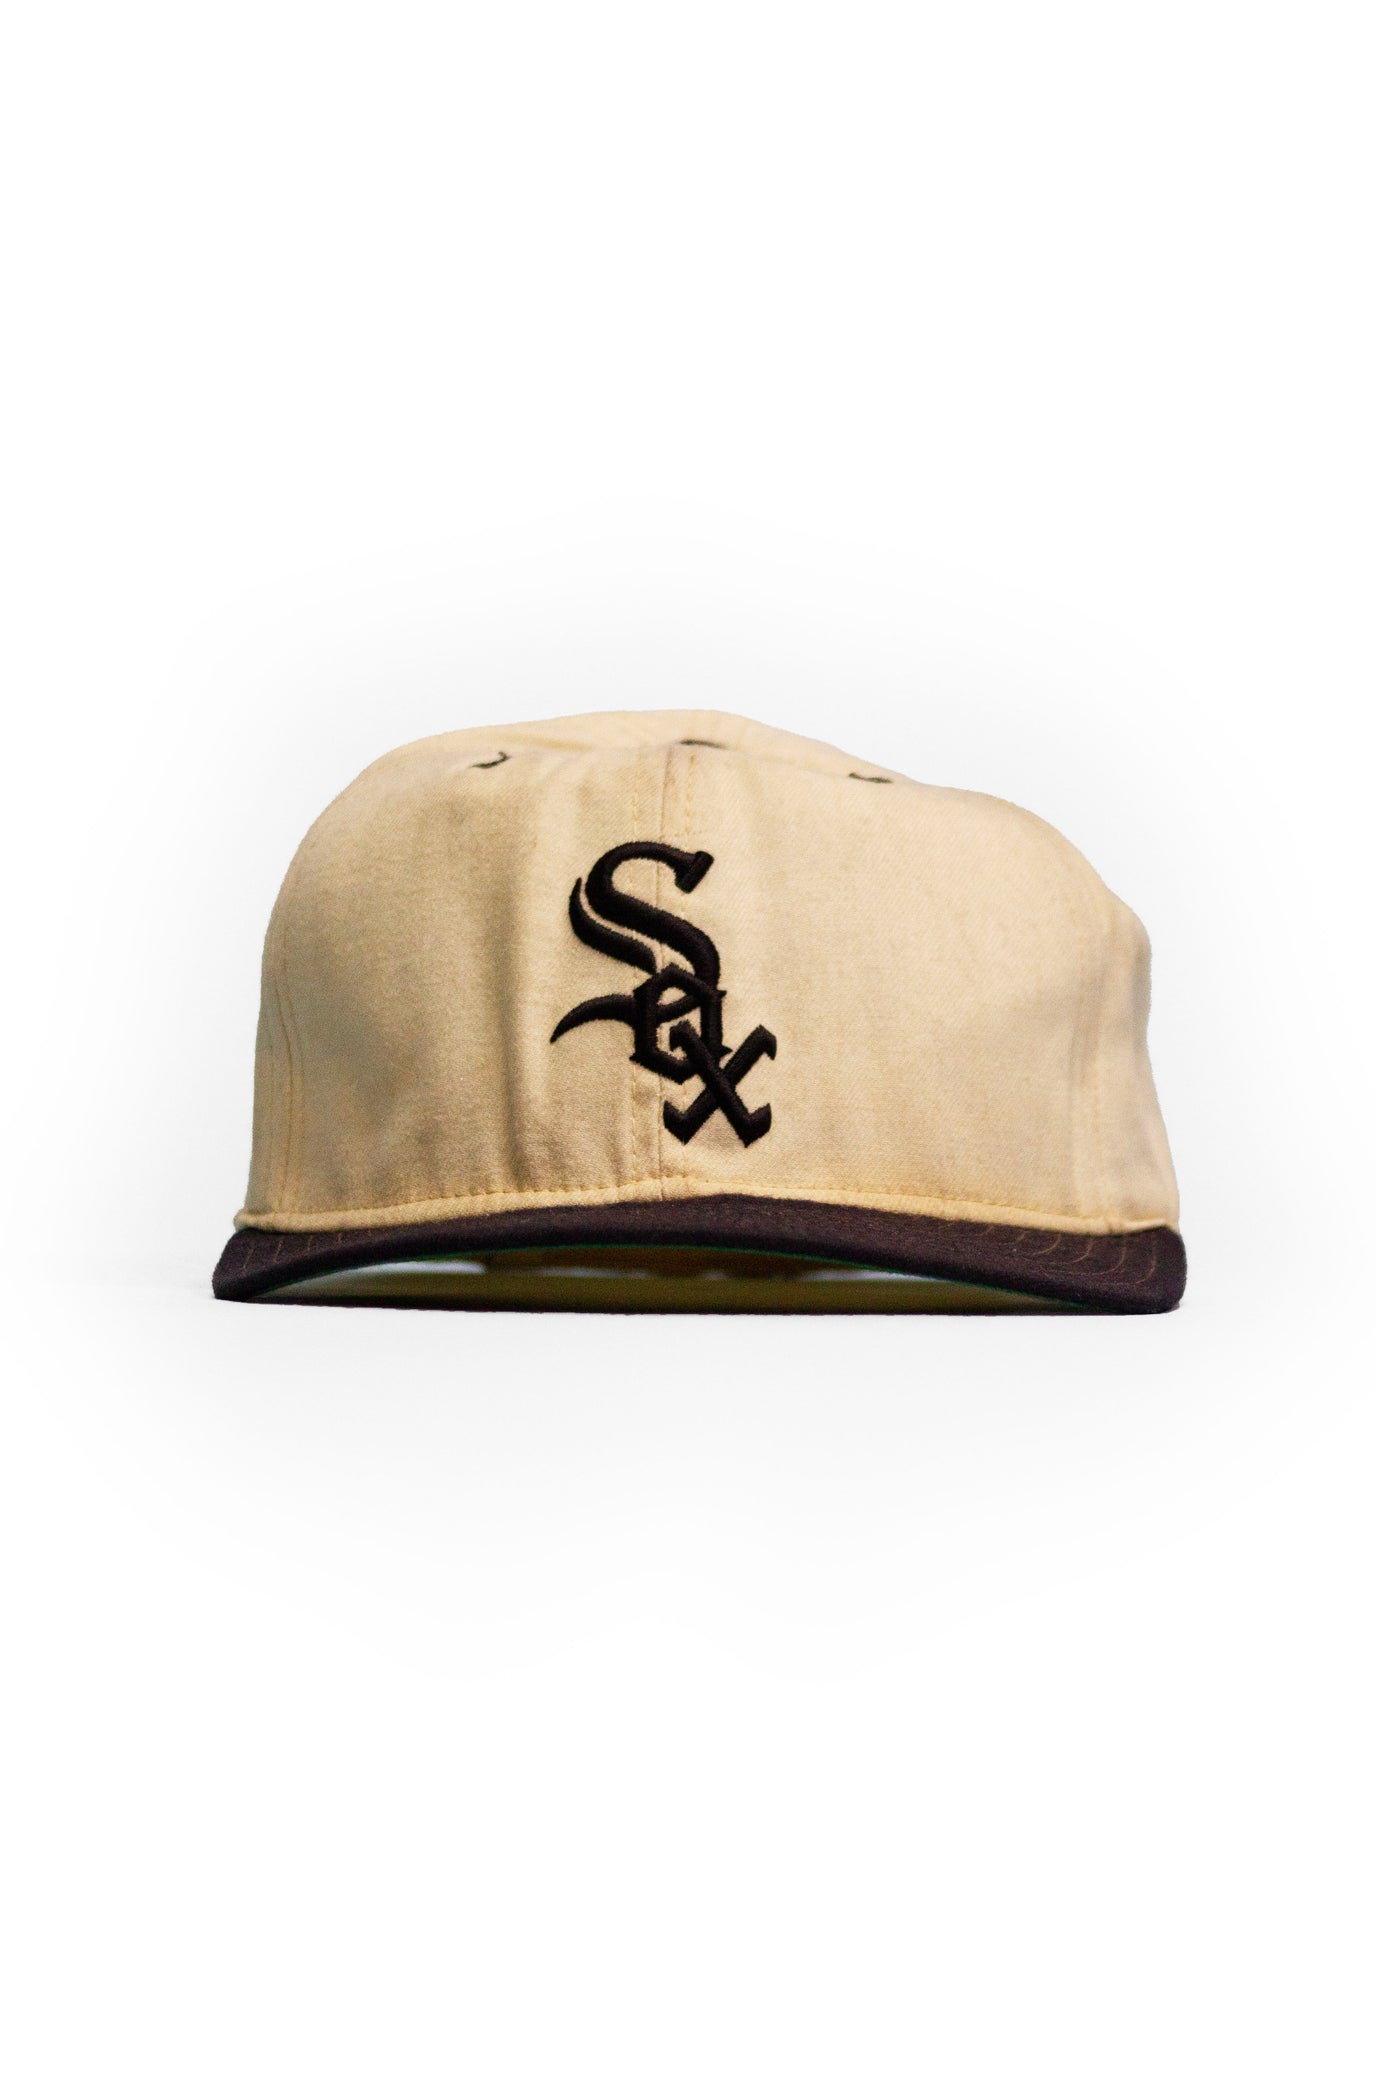 Vintage 80s Chicago White Sox Fitted Hat